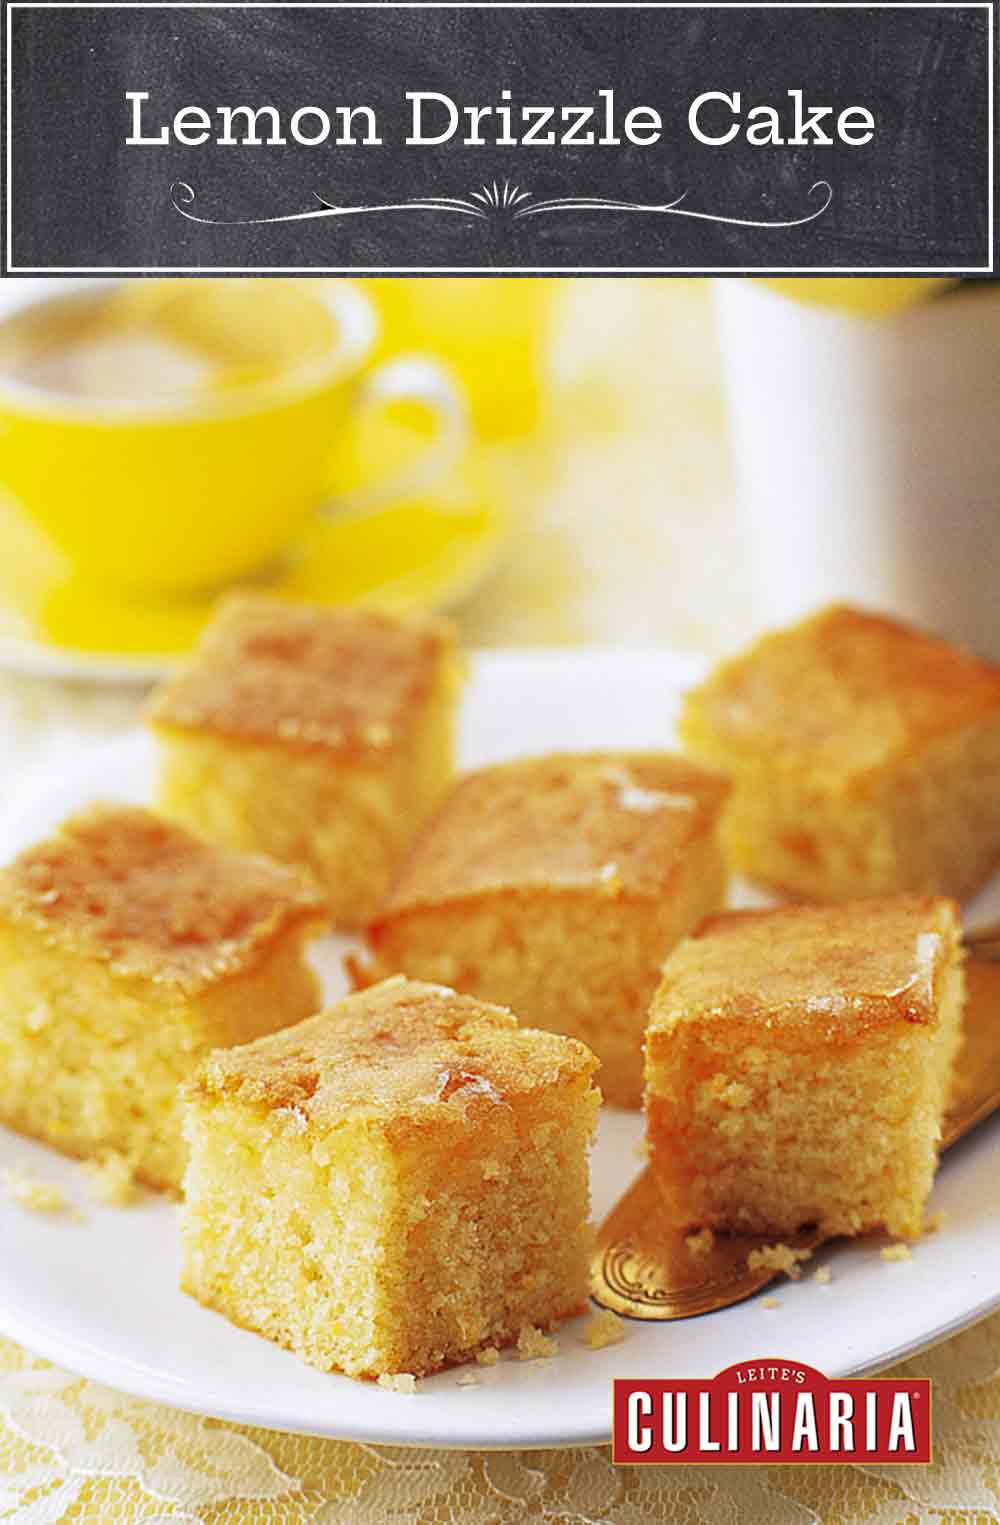 Squares of lemon drizzle cake on a white plate with a cake server resting underneath and a cup of tea and vase of flowers in the background.